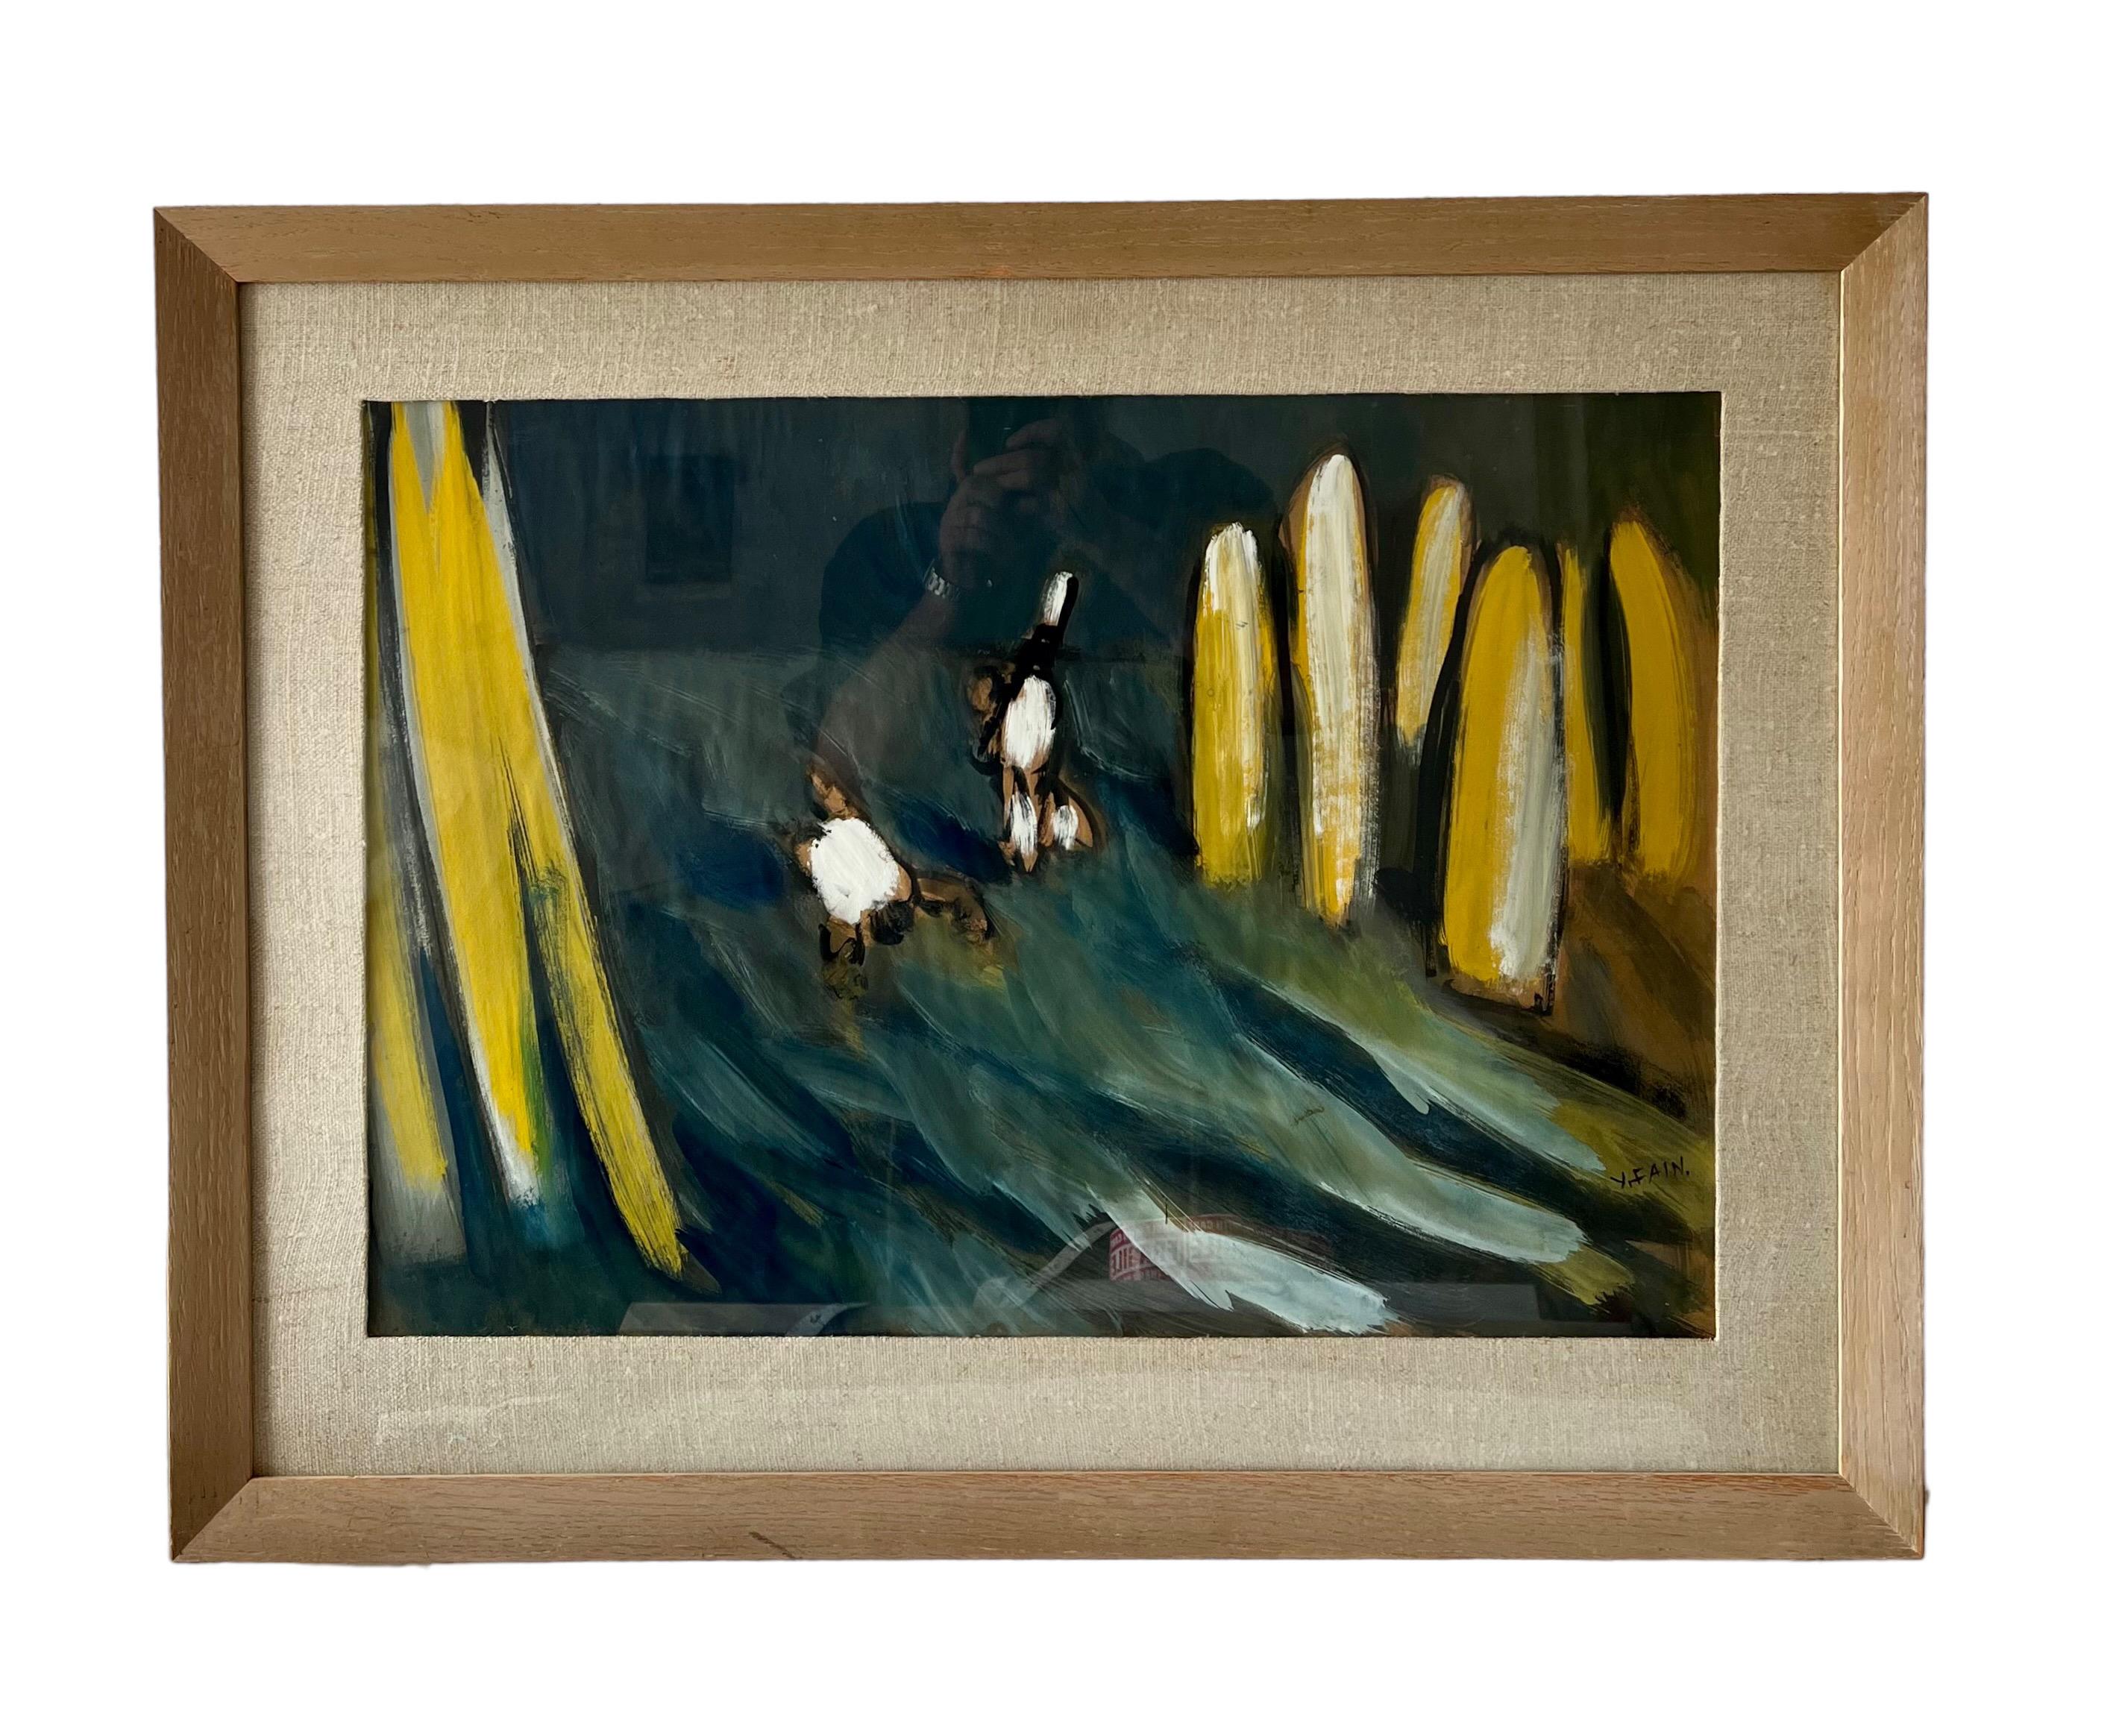 Yonia Fain (1913 - 2013) 
Gouache. Hand signed lower right. 
Sight Size: 19 x 27 in. Size: 27 x 34.5 in. 
Framed behind glass.


Genre: Avant-Garde
Subject: Abstract Mexican Seascape
Medium: Gouache
Surface: Paper
Country: Mexico


Although this oil